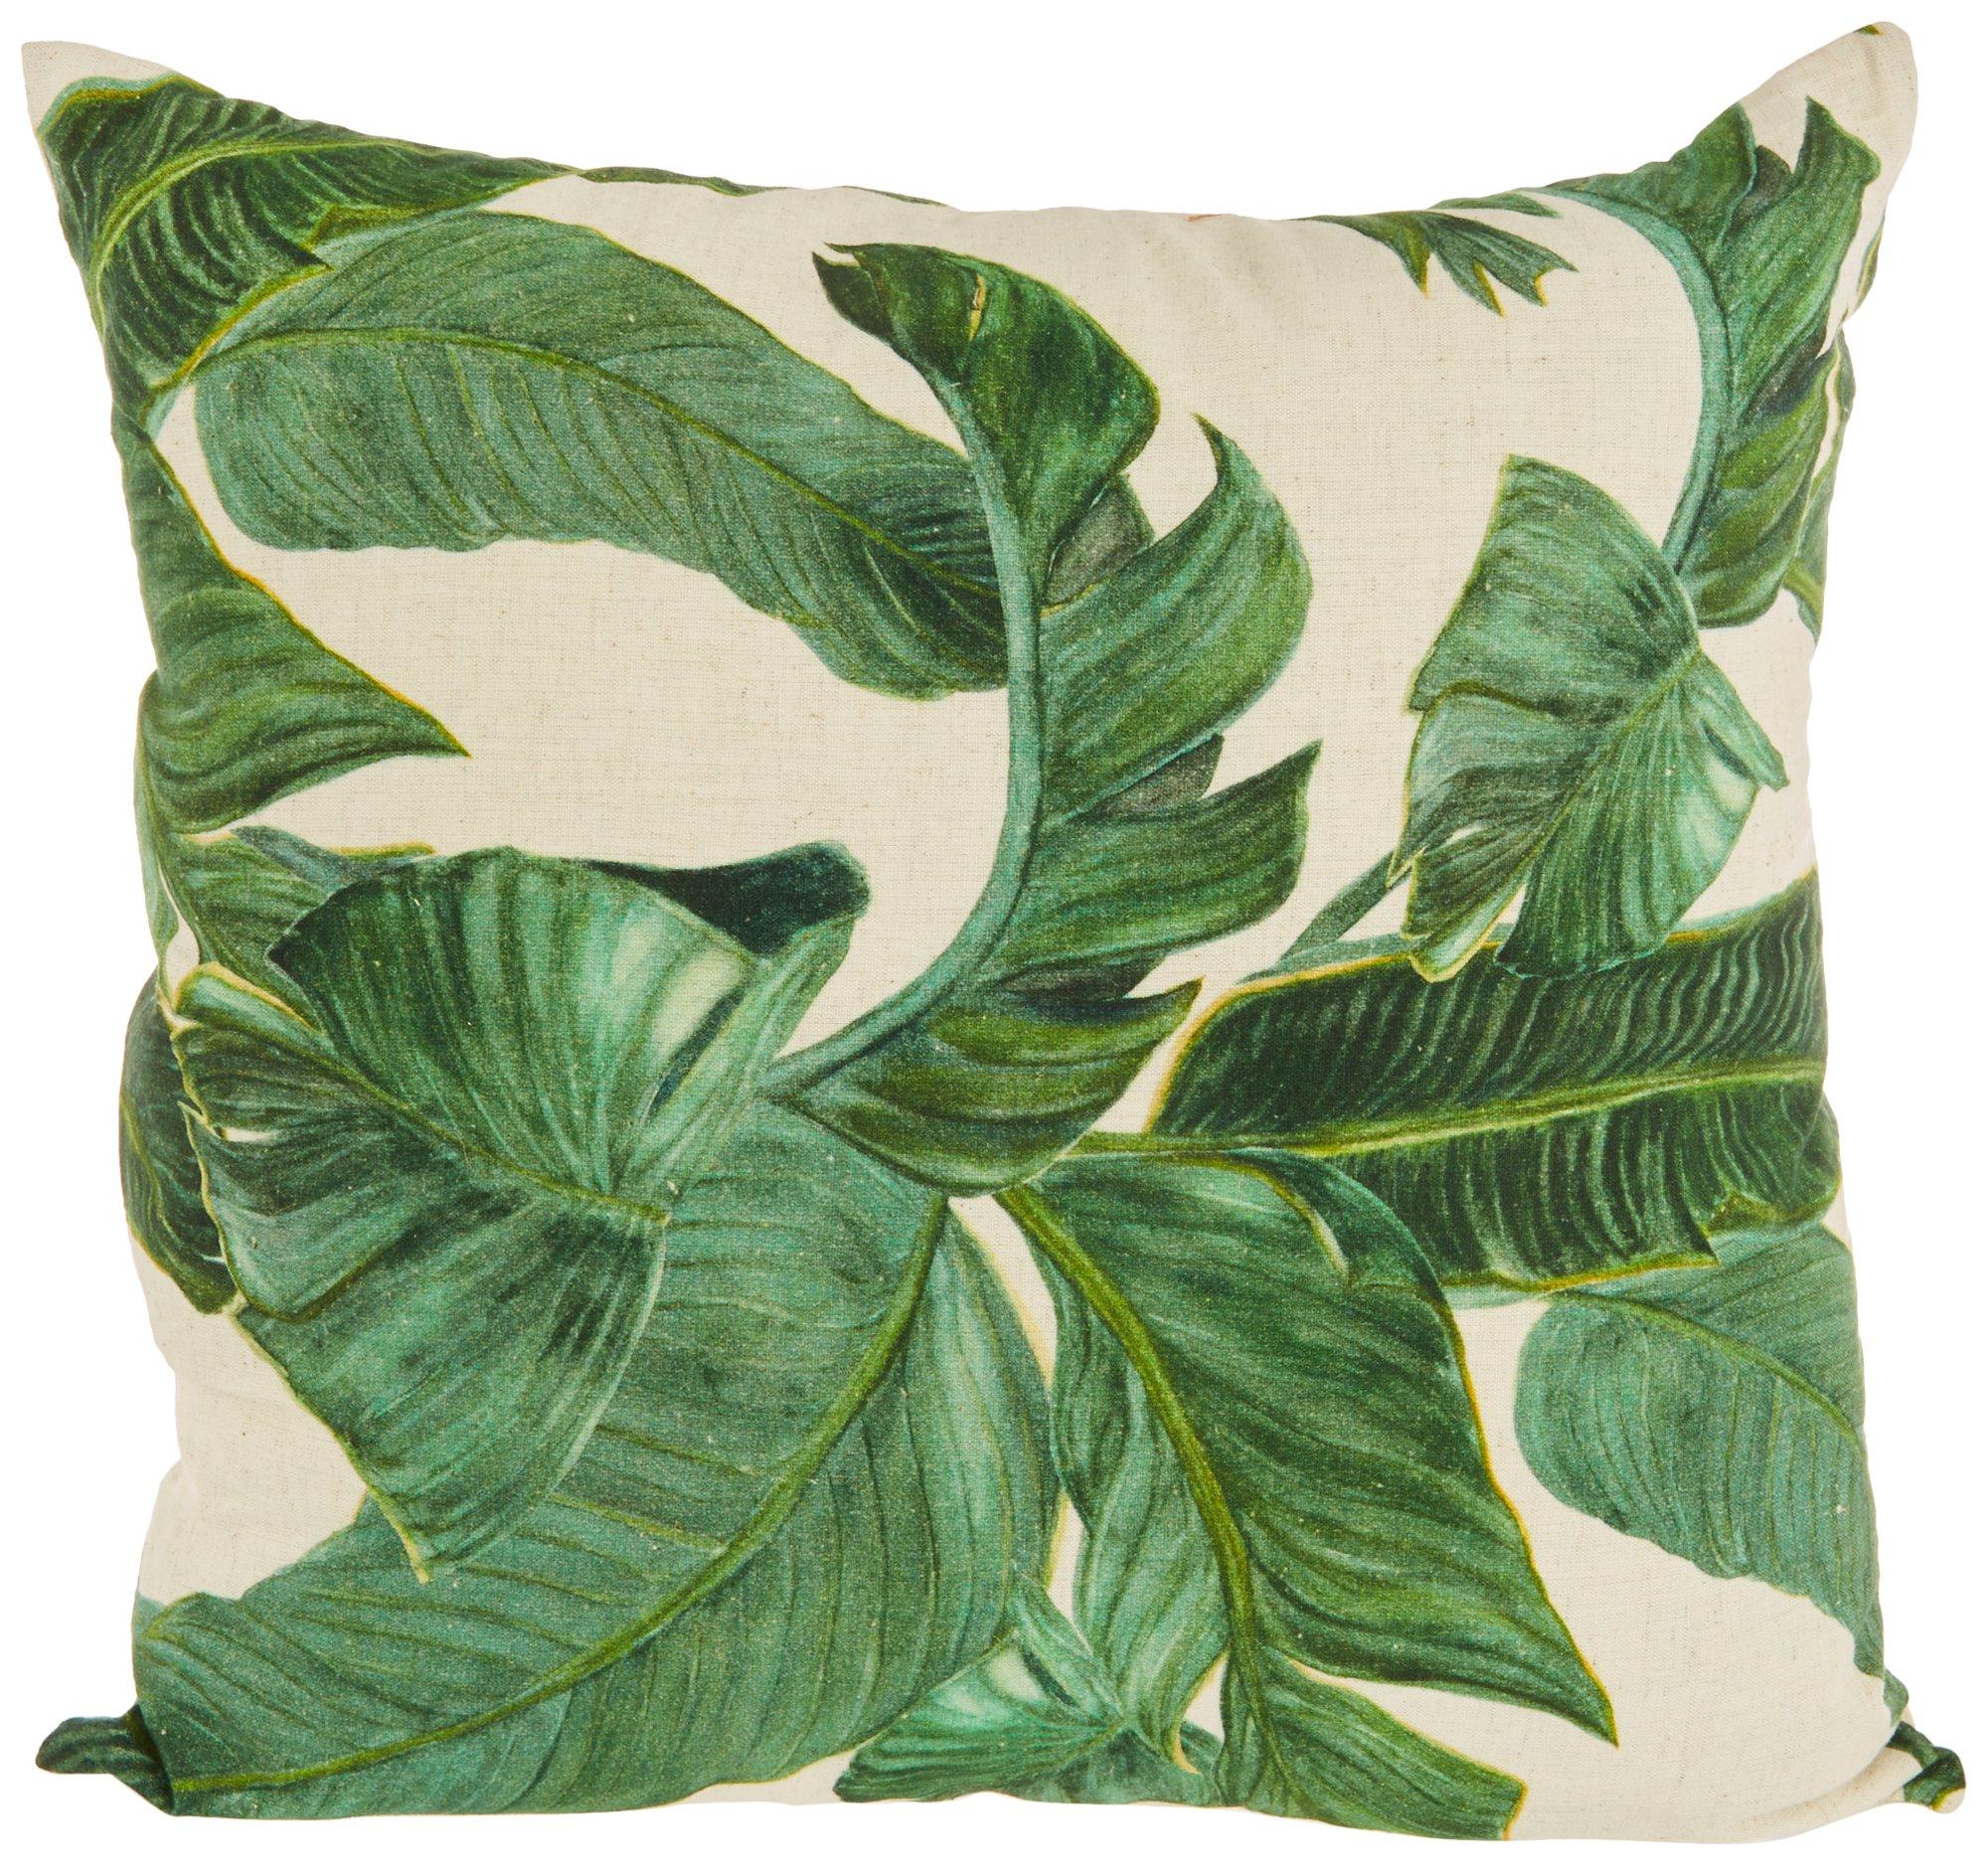 VCNY Home 18x18 Printed Palm Decorative Pillow